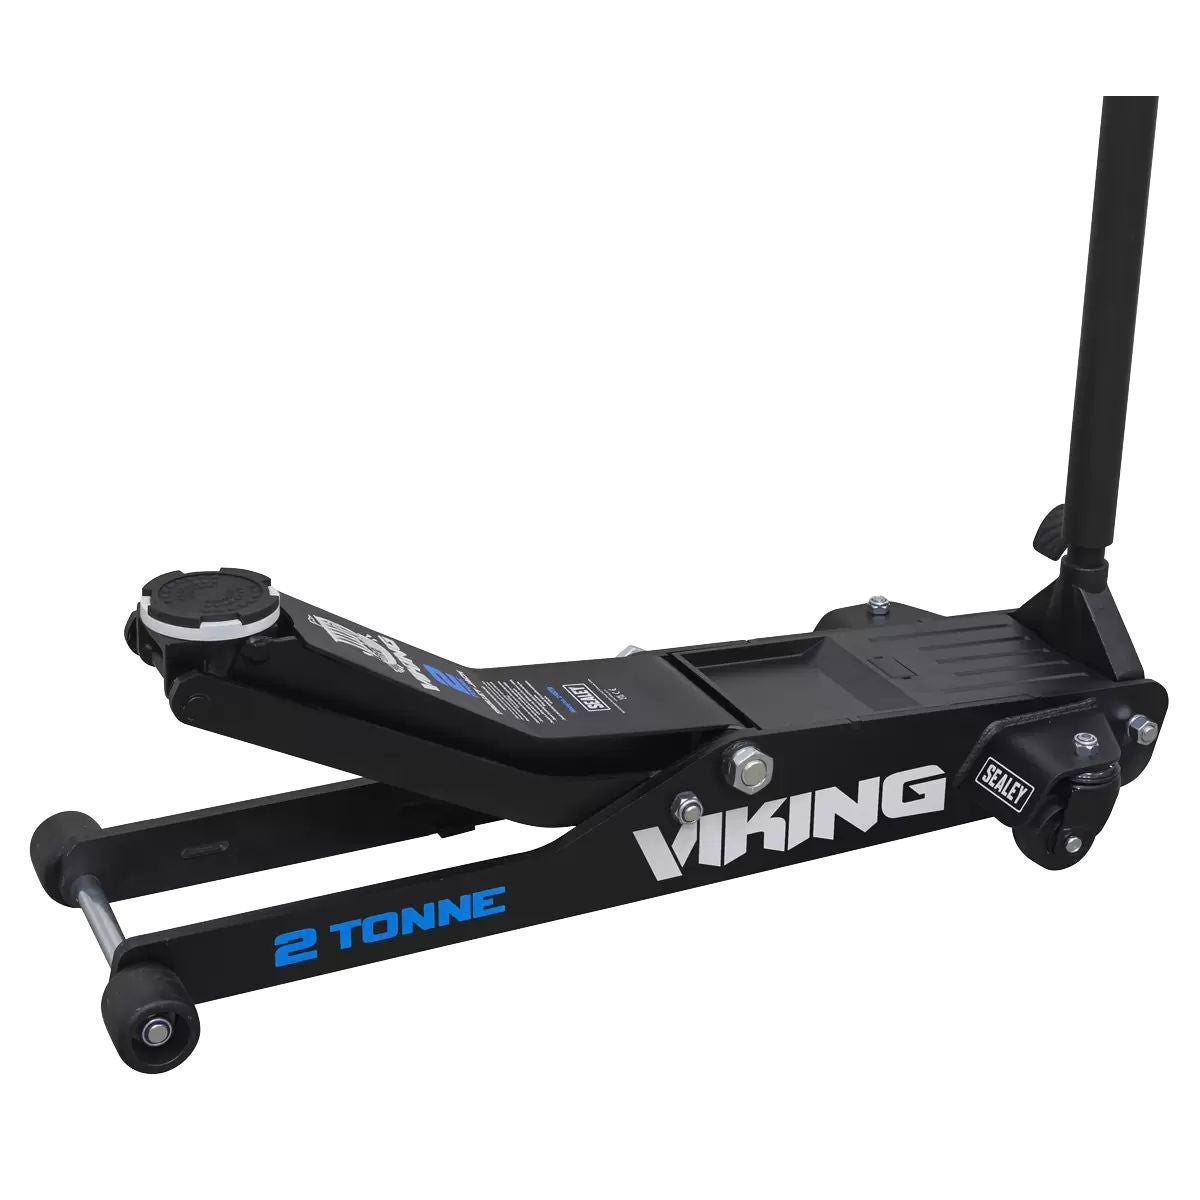 Sealey 2100TB Viking Low Entry Long Reach Trolley Jack with Rocket Lift 2 Tonne